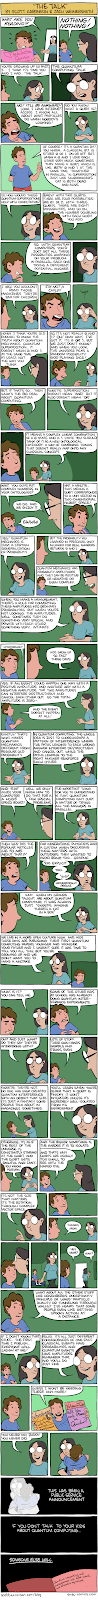 Long comic strip about kid learning Quantum Computing and a Mom trying delicately to have "the talk" - but both mean quantum computing, not the obvious inference.